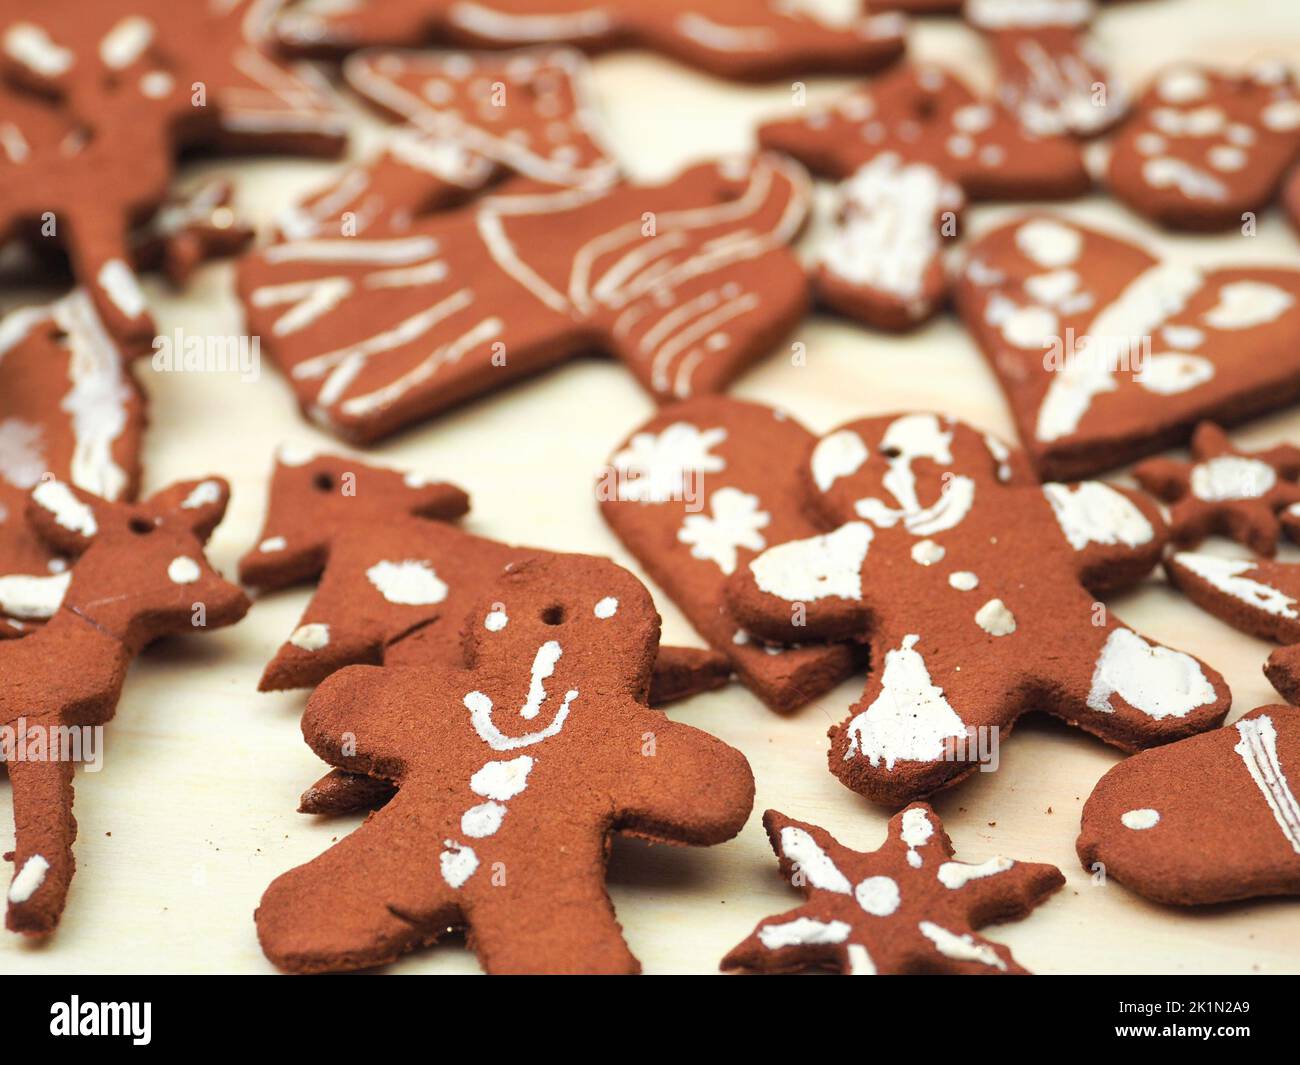 Full Frame Shot Of Gingerbread Cookies Stock Photo